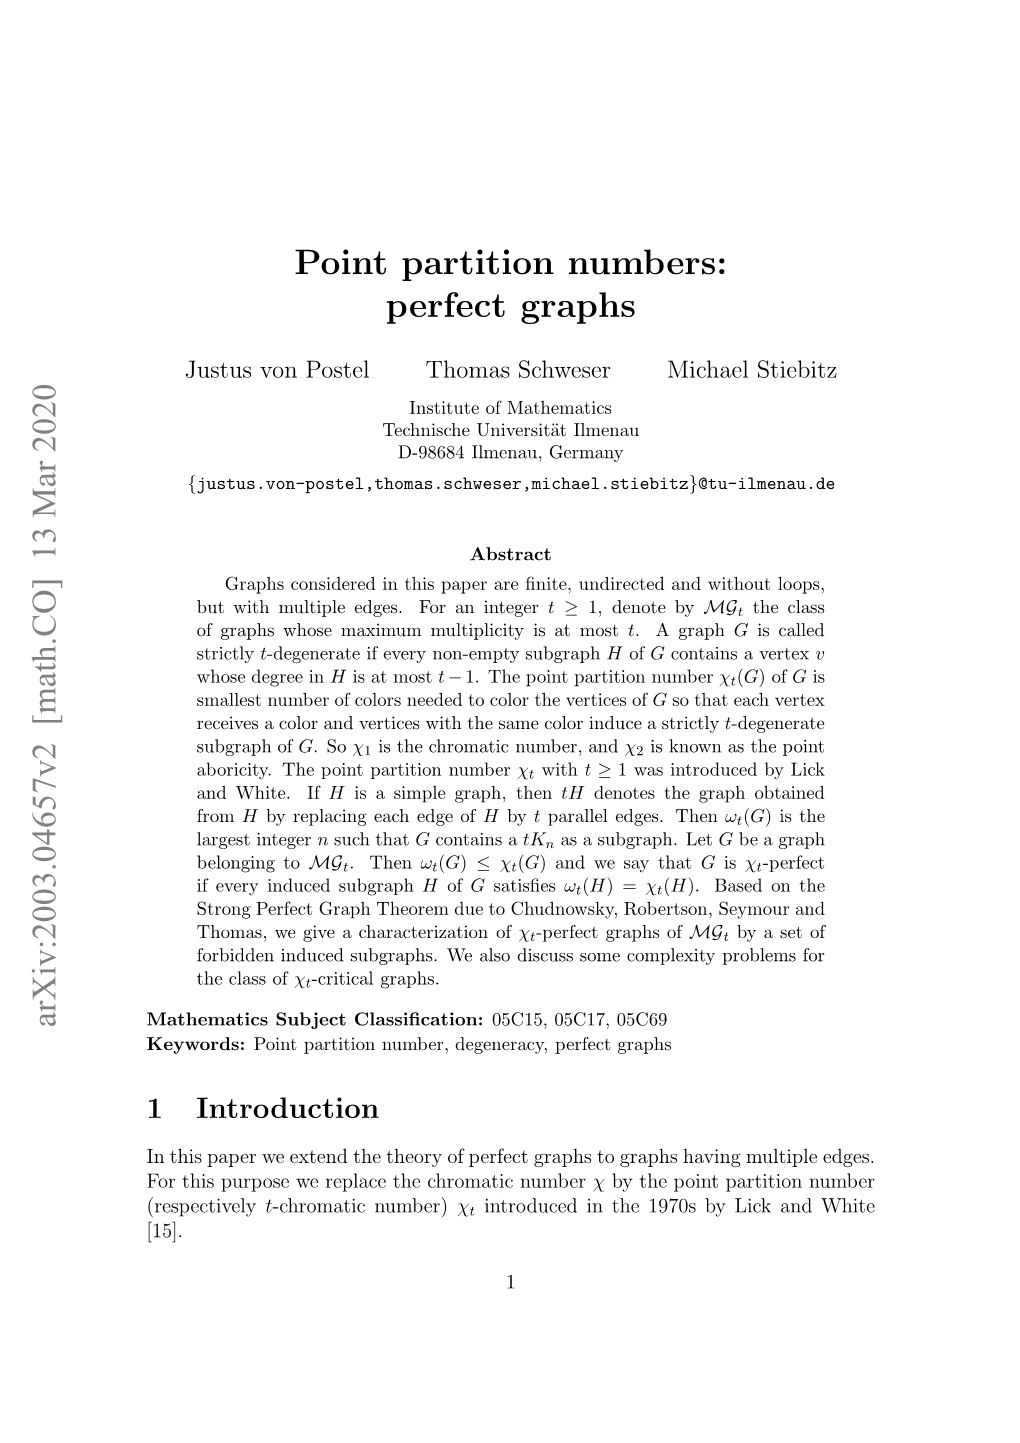 Point Partition Numbers: Perfect Graphs